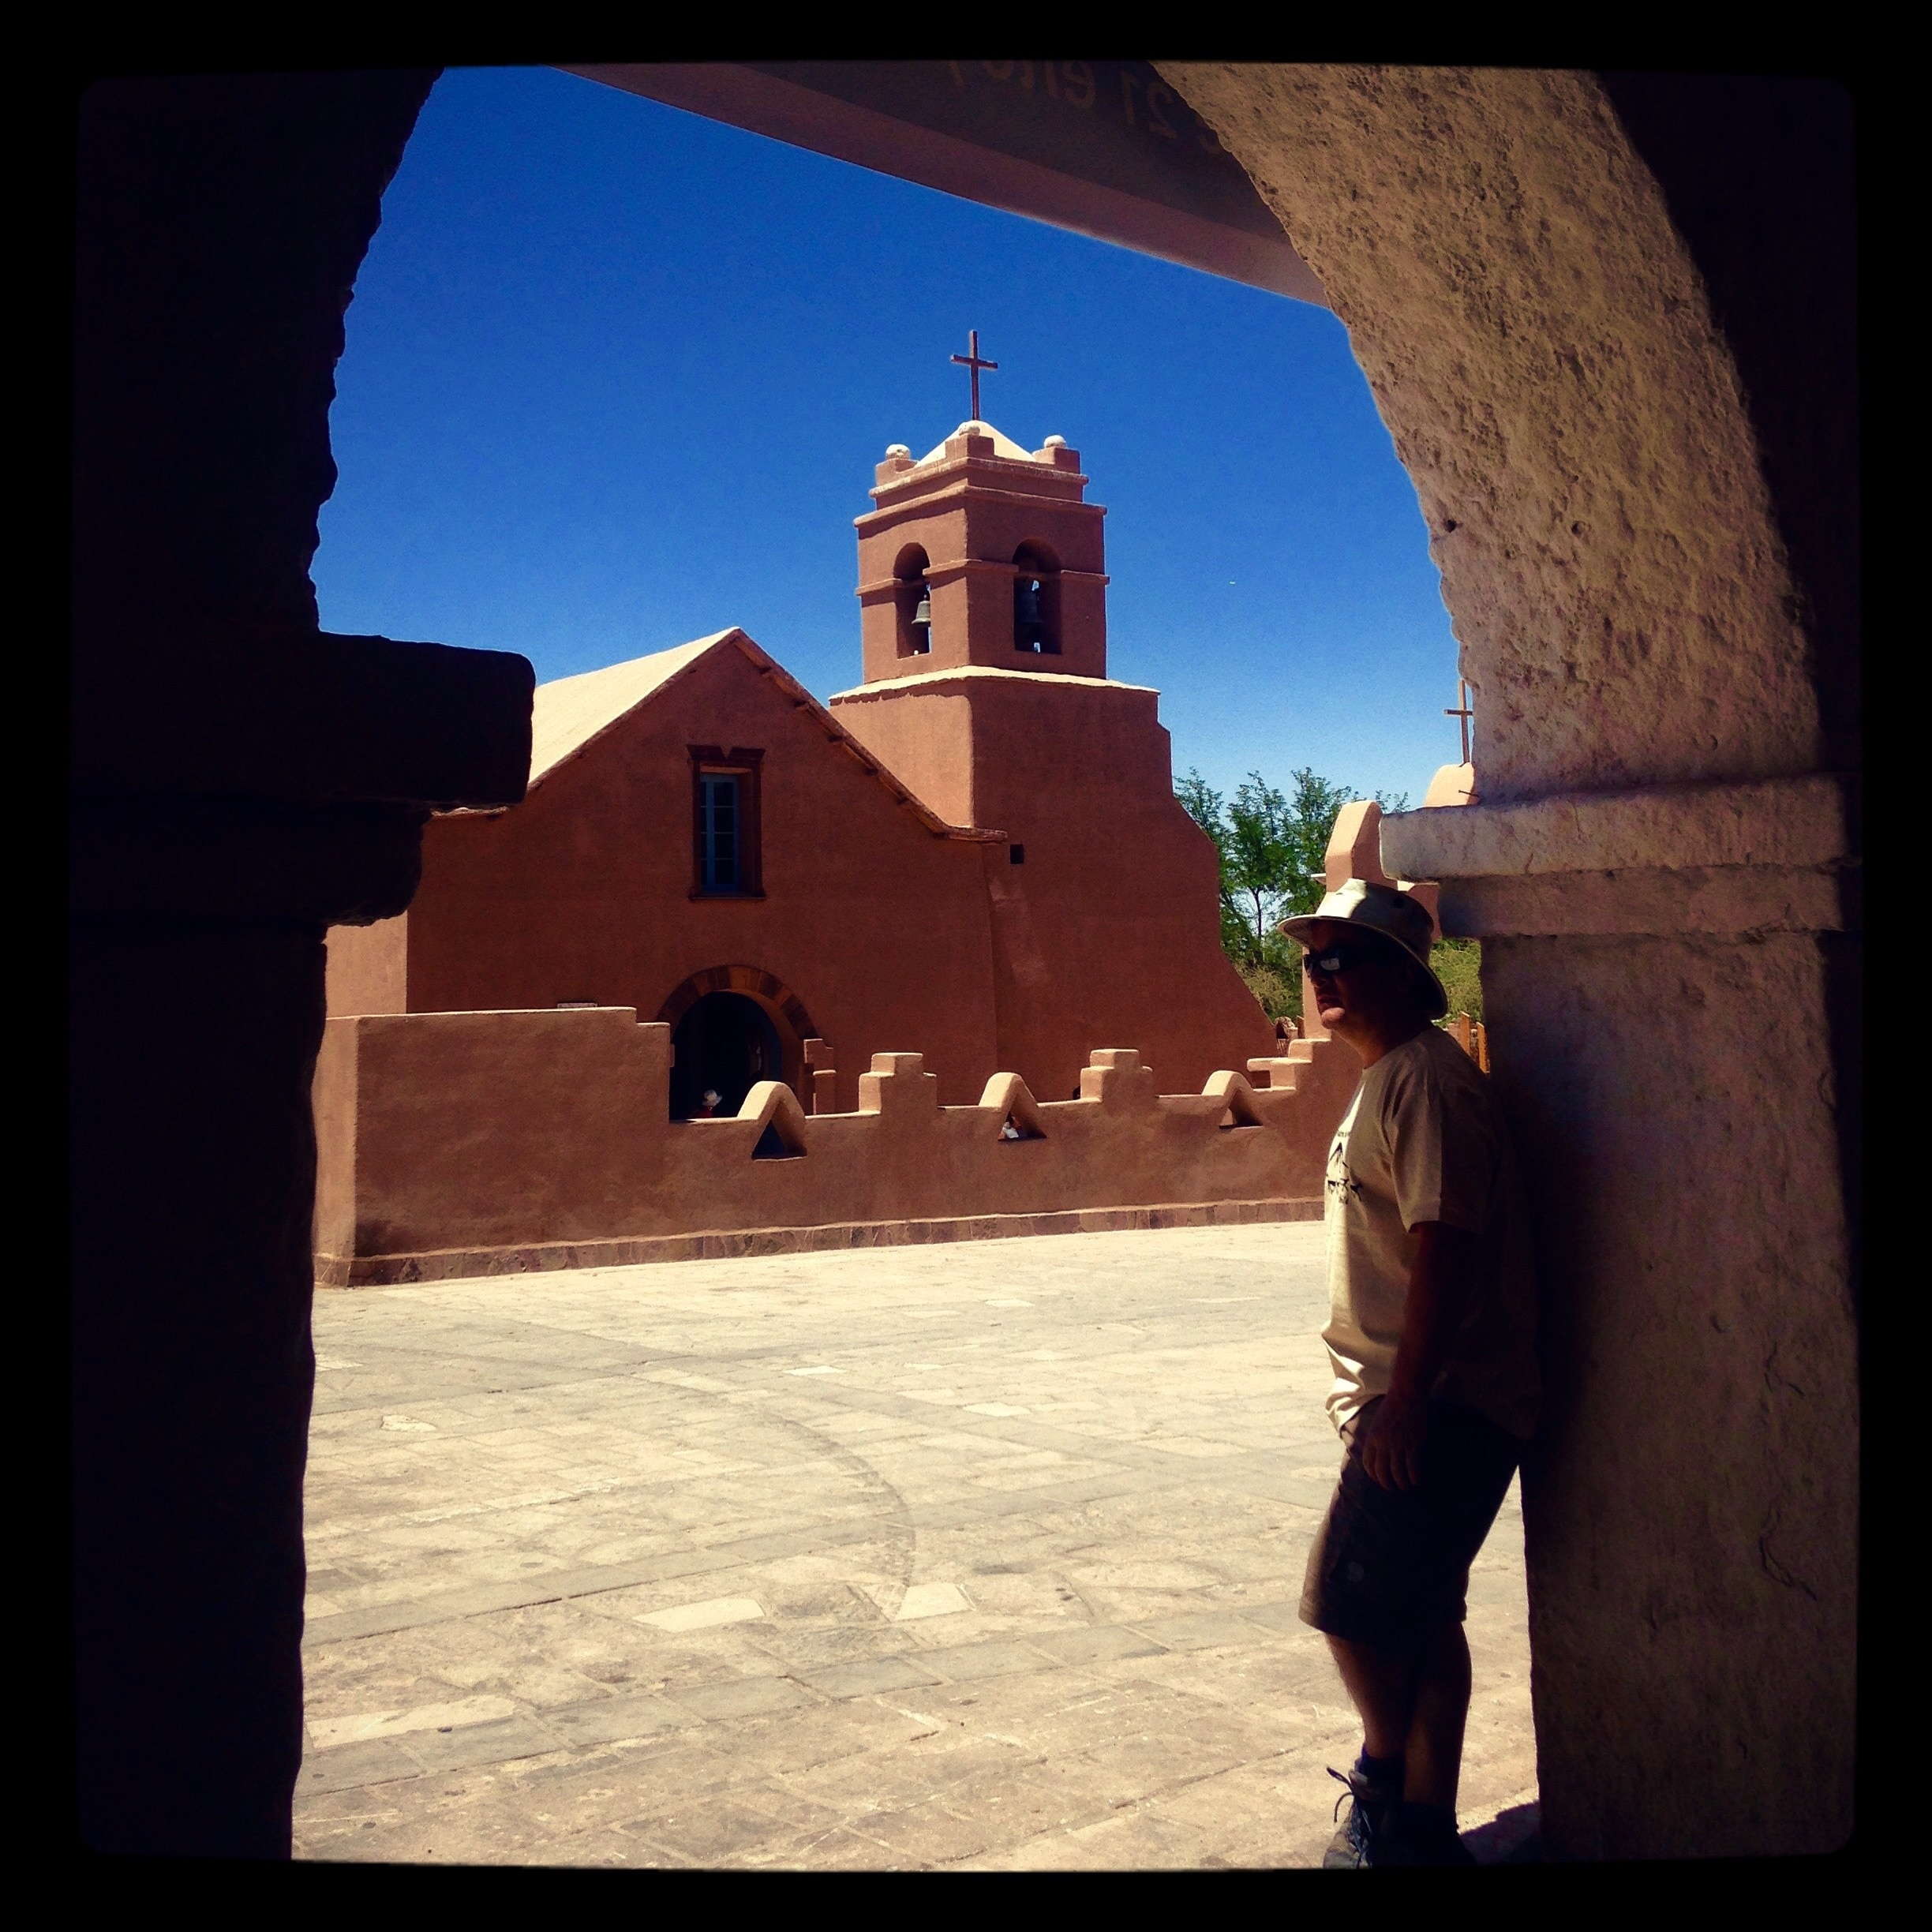 Second oldest church in Chile, completed in the 17th century in San Pedro de Atacama, town in the middle of the arid Atacama desert